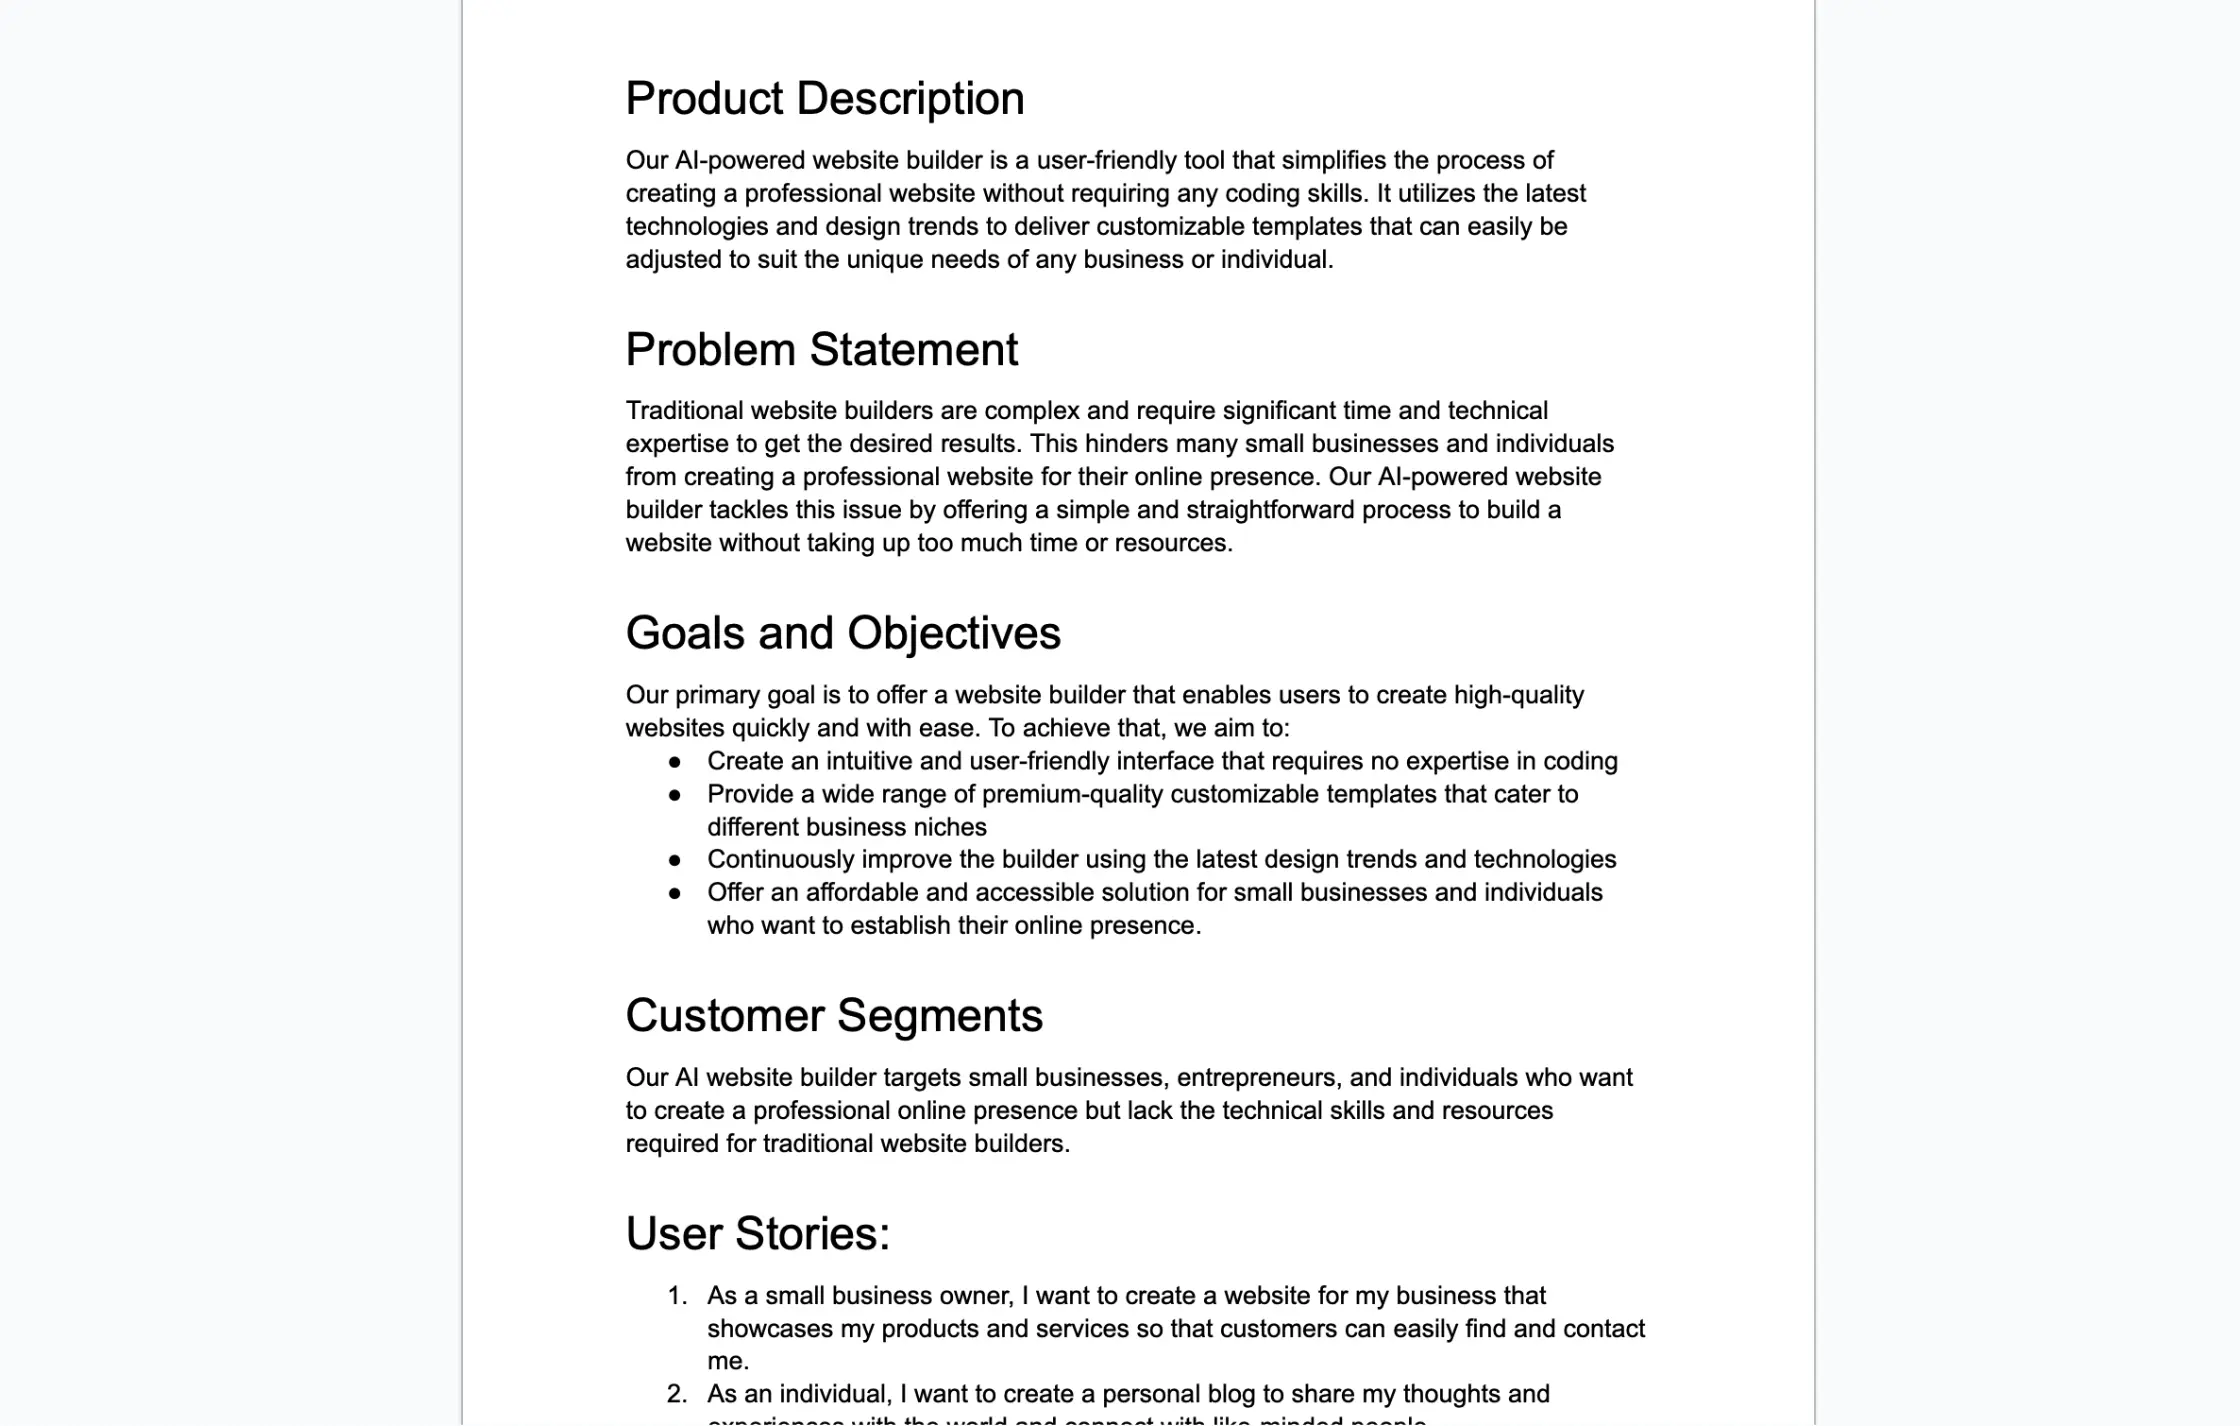 Product Requirements Document (PRD)